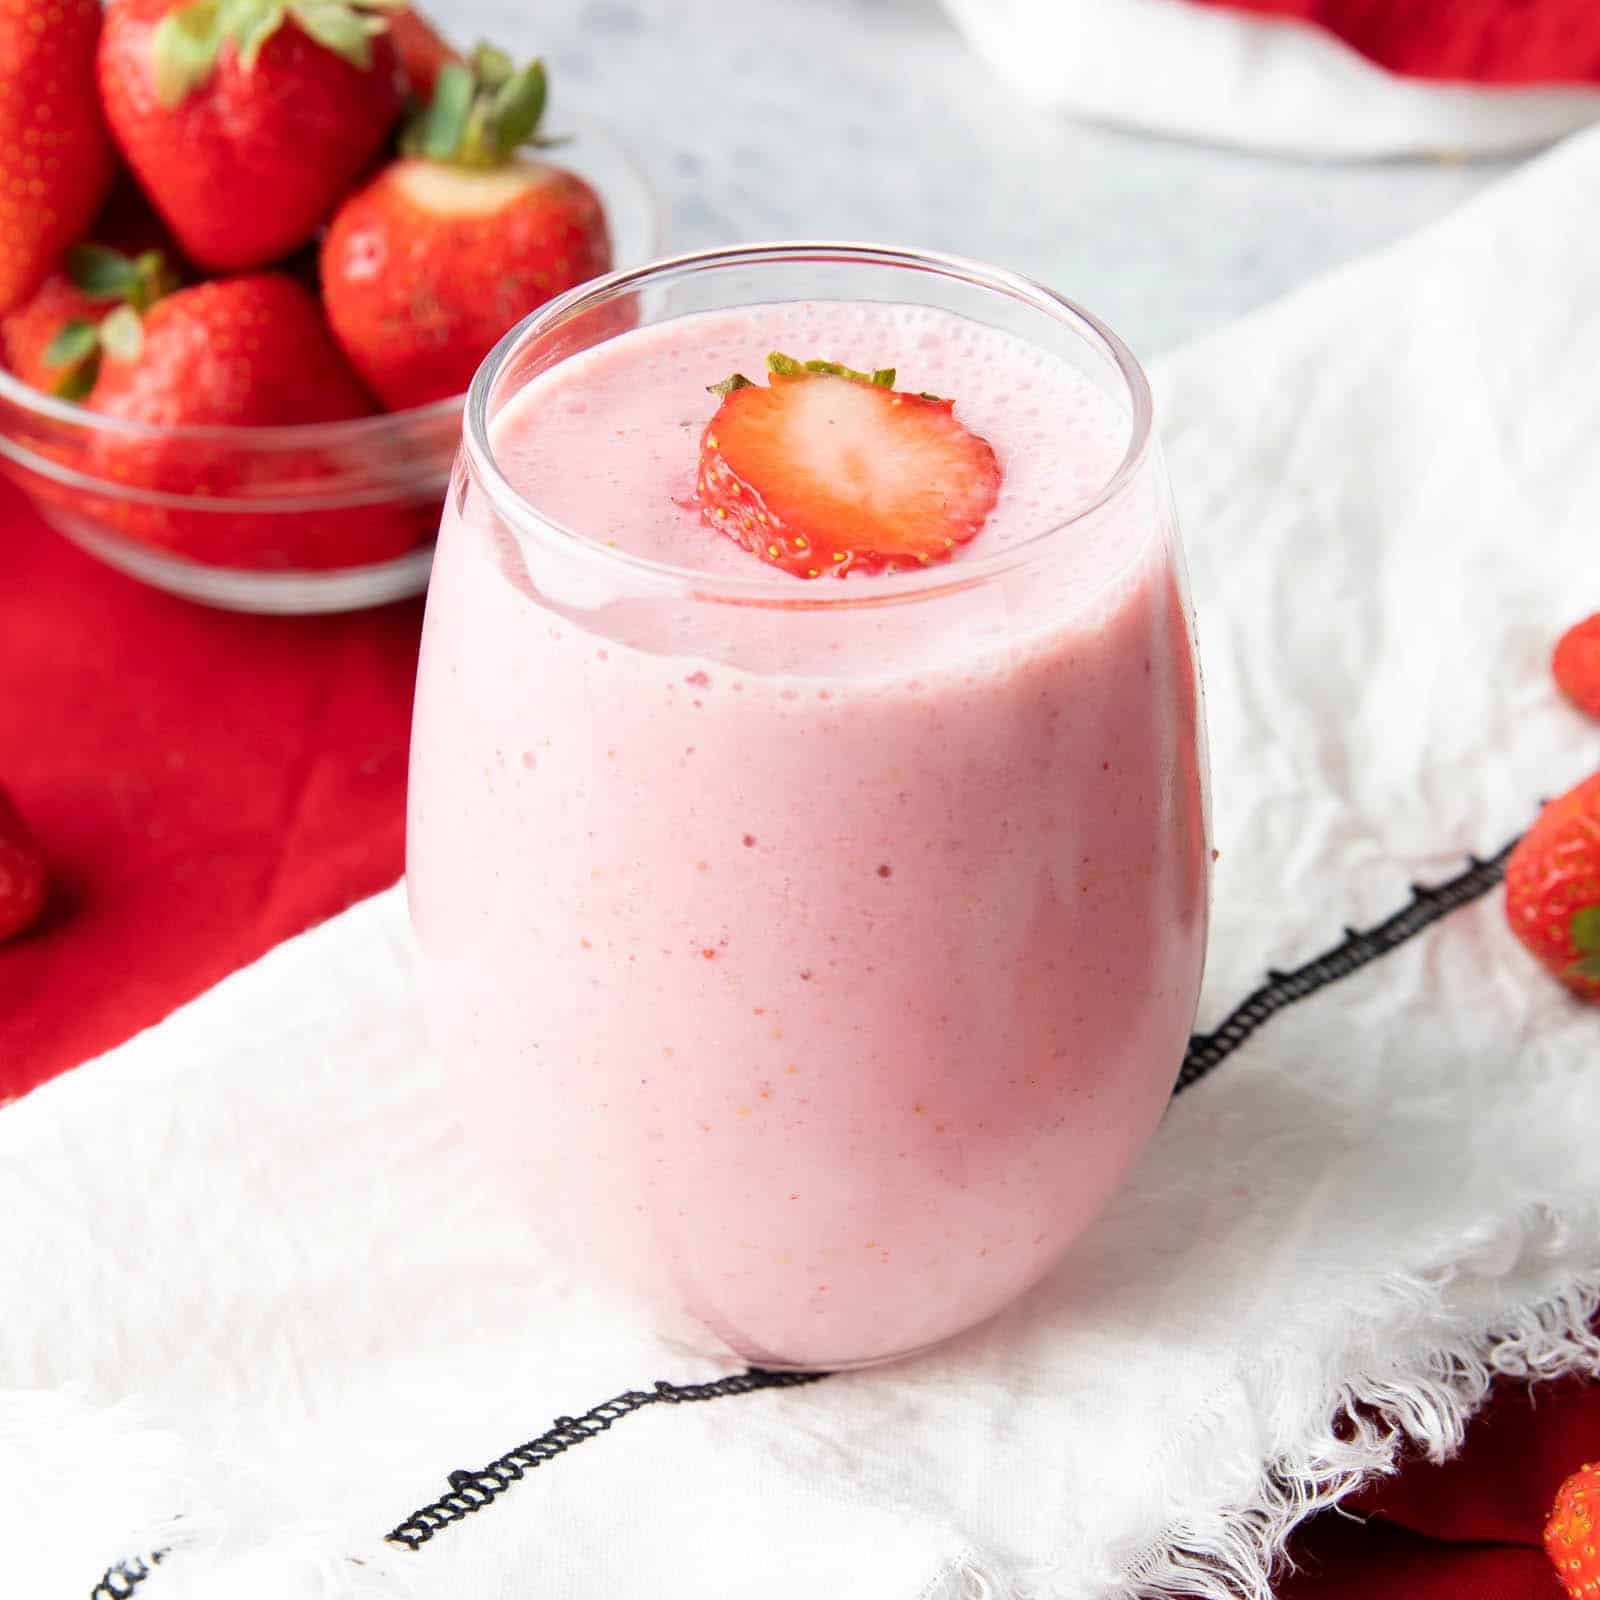 Strawberry Smoothie with Oat Milk, Soy or Almond Milk!